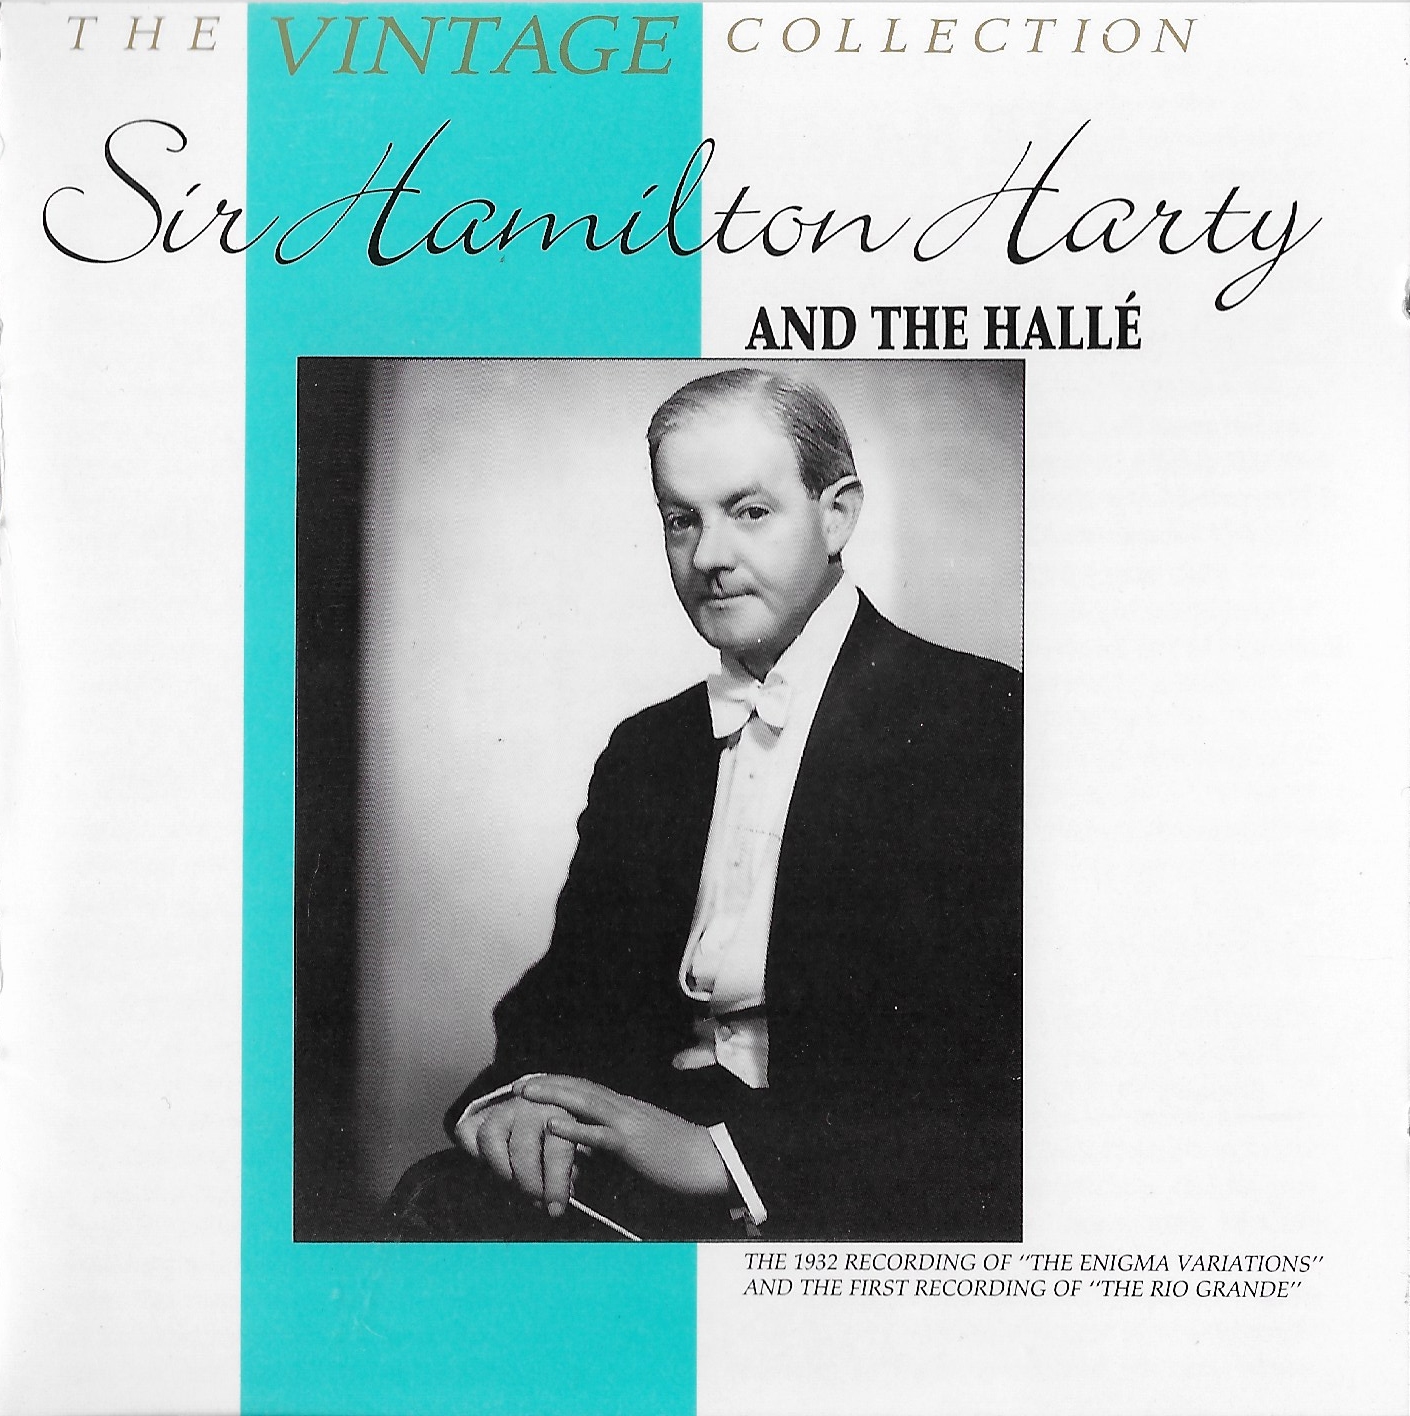 Picture of BBCCD756 The vintage collection - Hamilton Harty and The Halle by artist Hamilton Harty from the BBC cds - Records and Tapes library